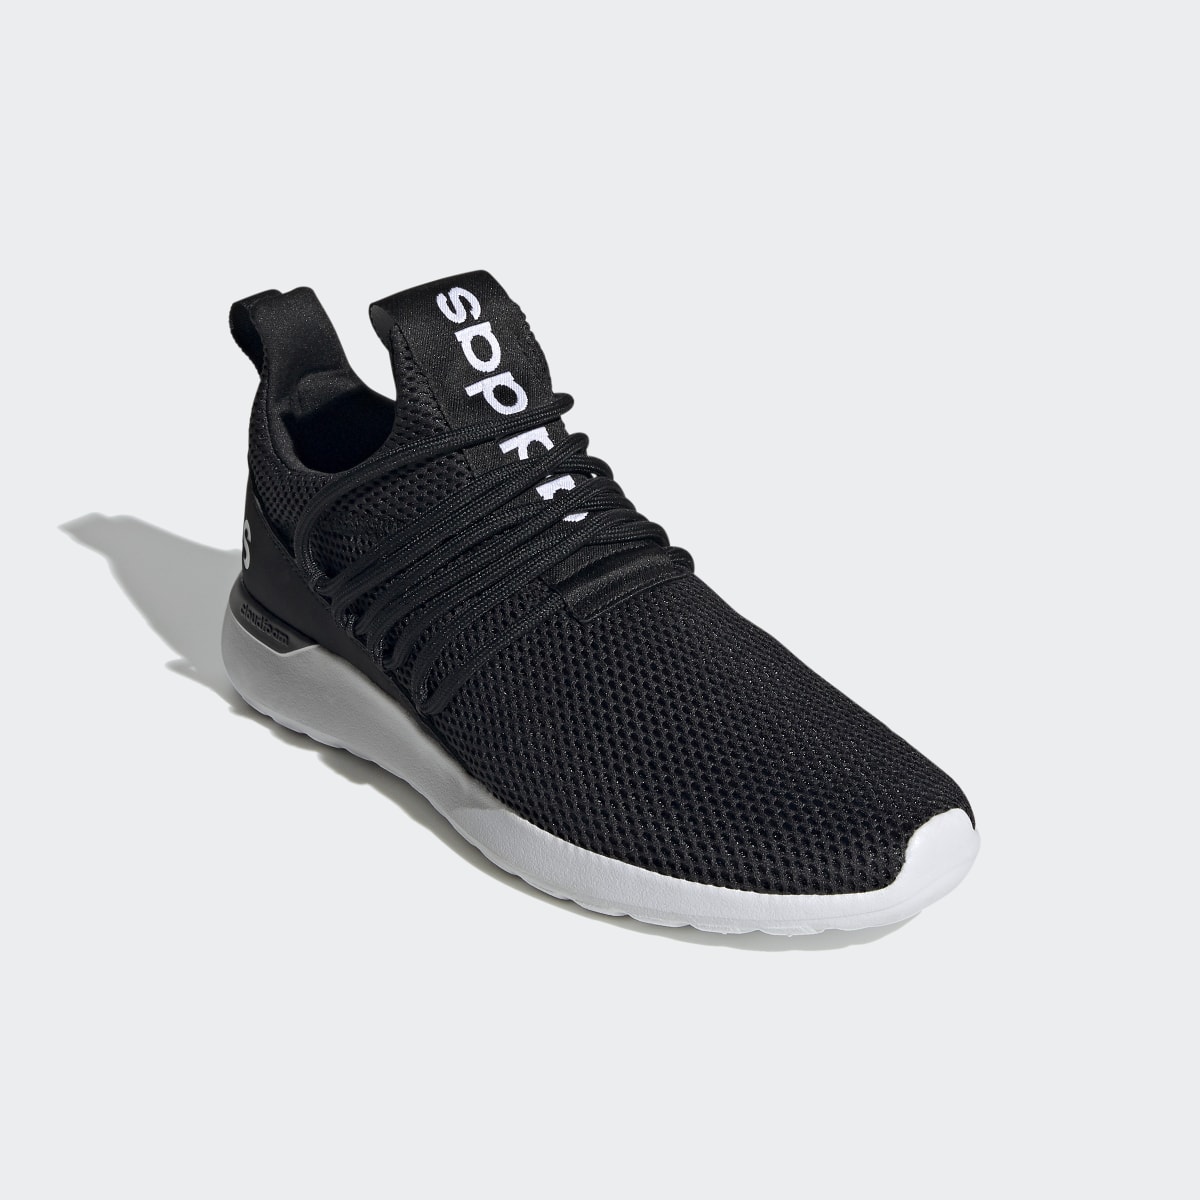 Adidas Lite Racer Adapt 3.0 Shoes. 5